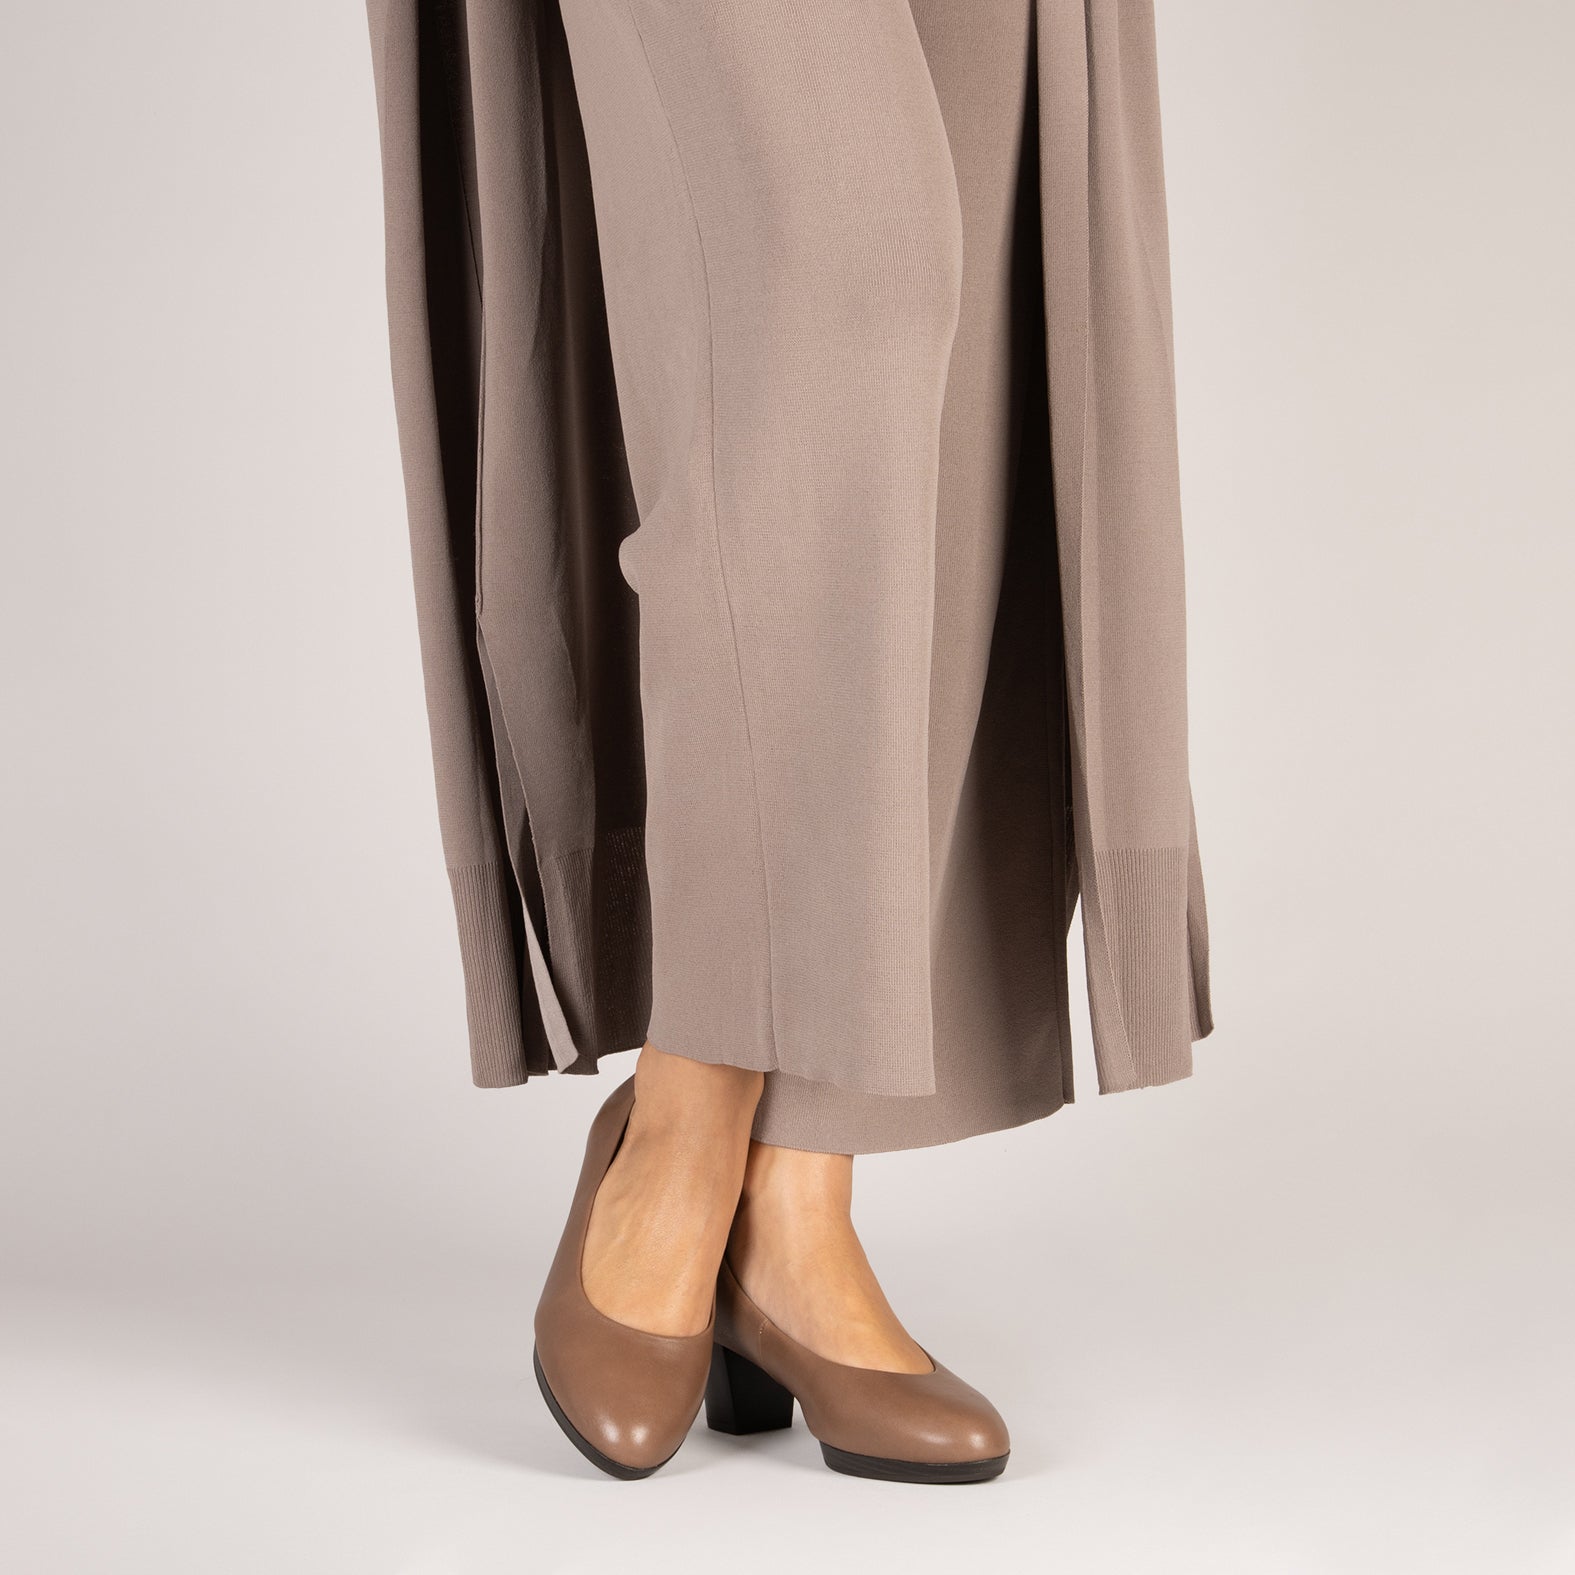 FLIGHT S – TAUPE low heels and platform shoes